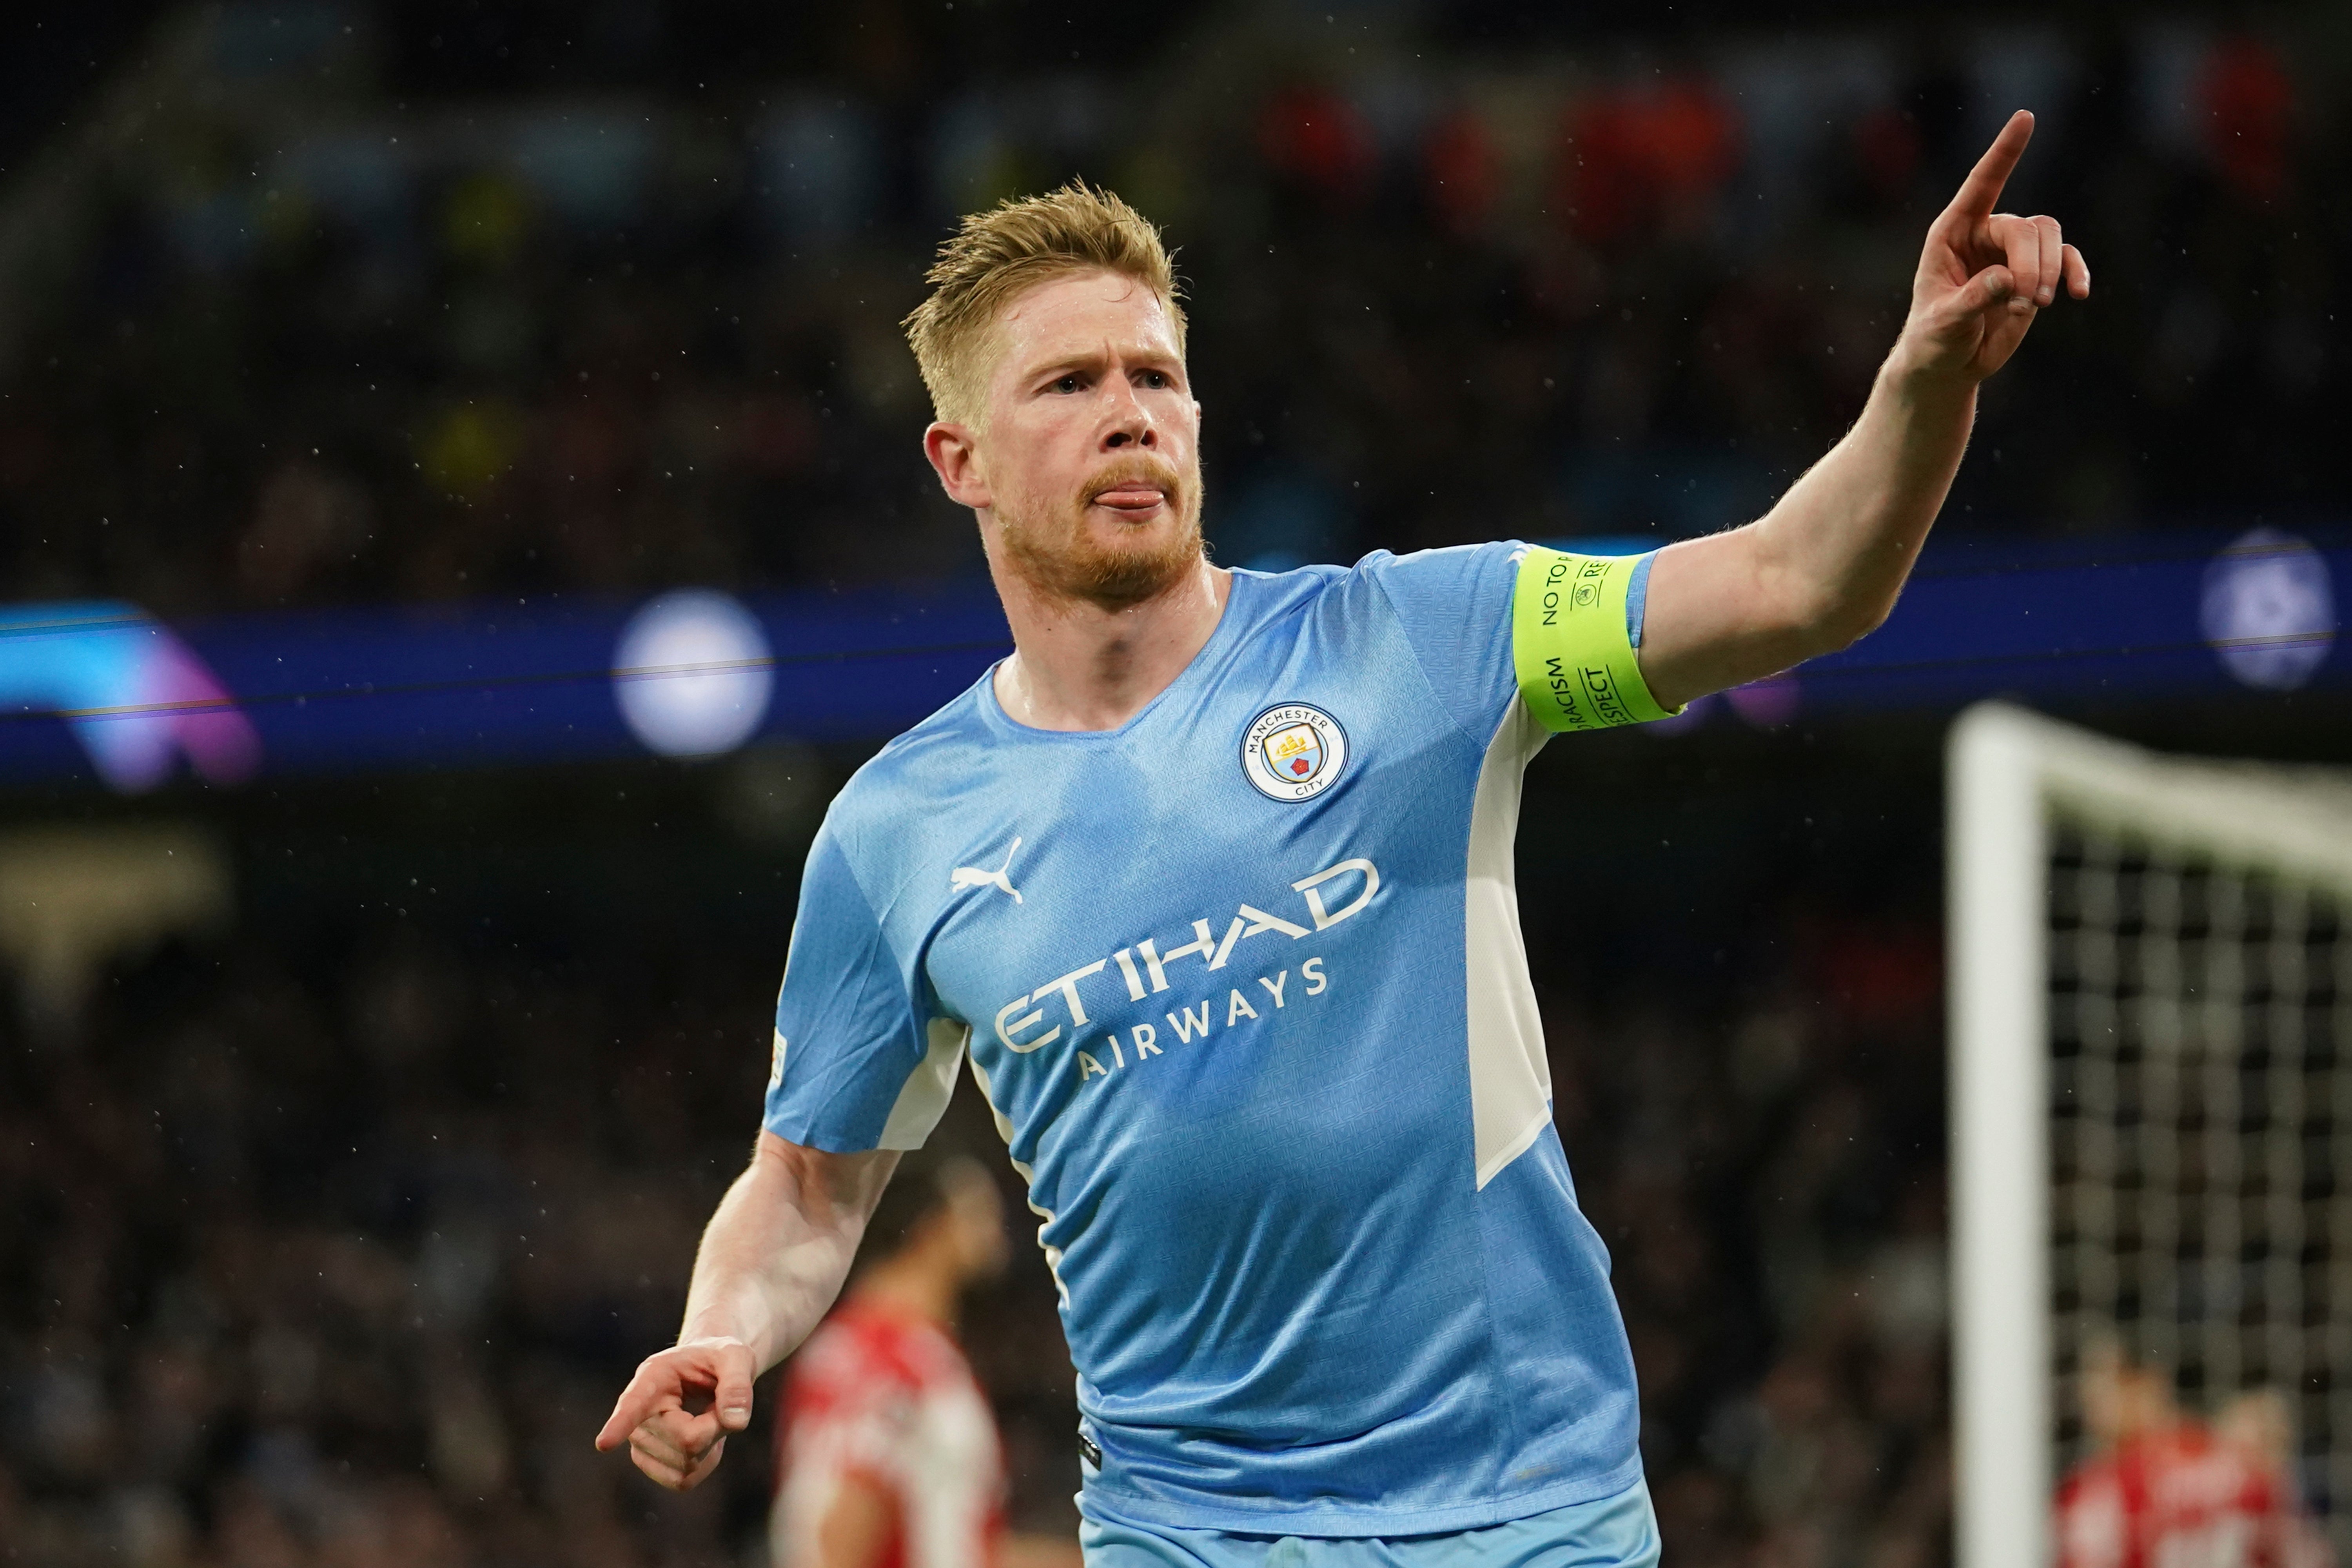 De Bruyne was baffled by his opposition’s tactics